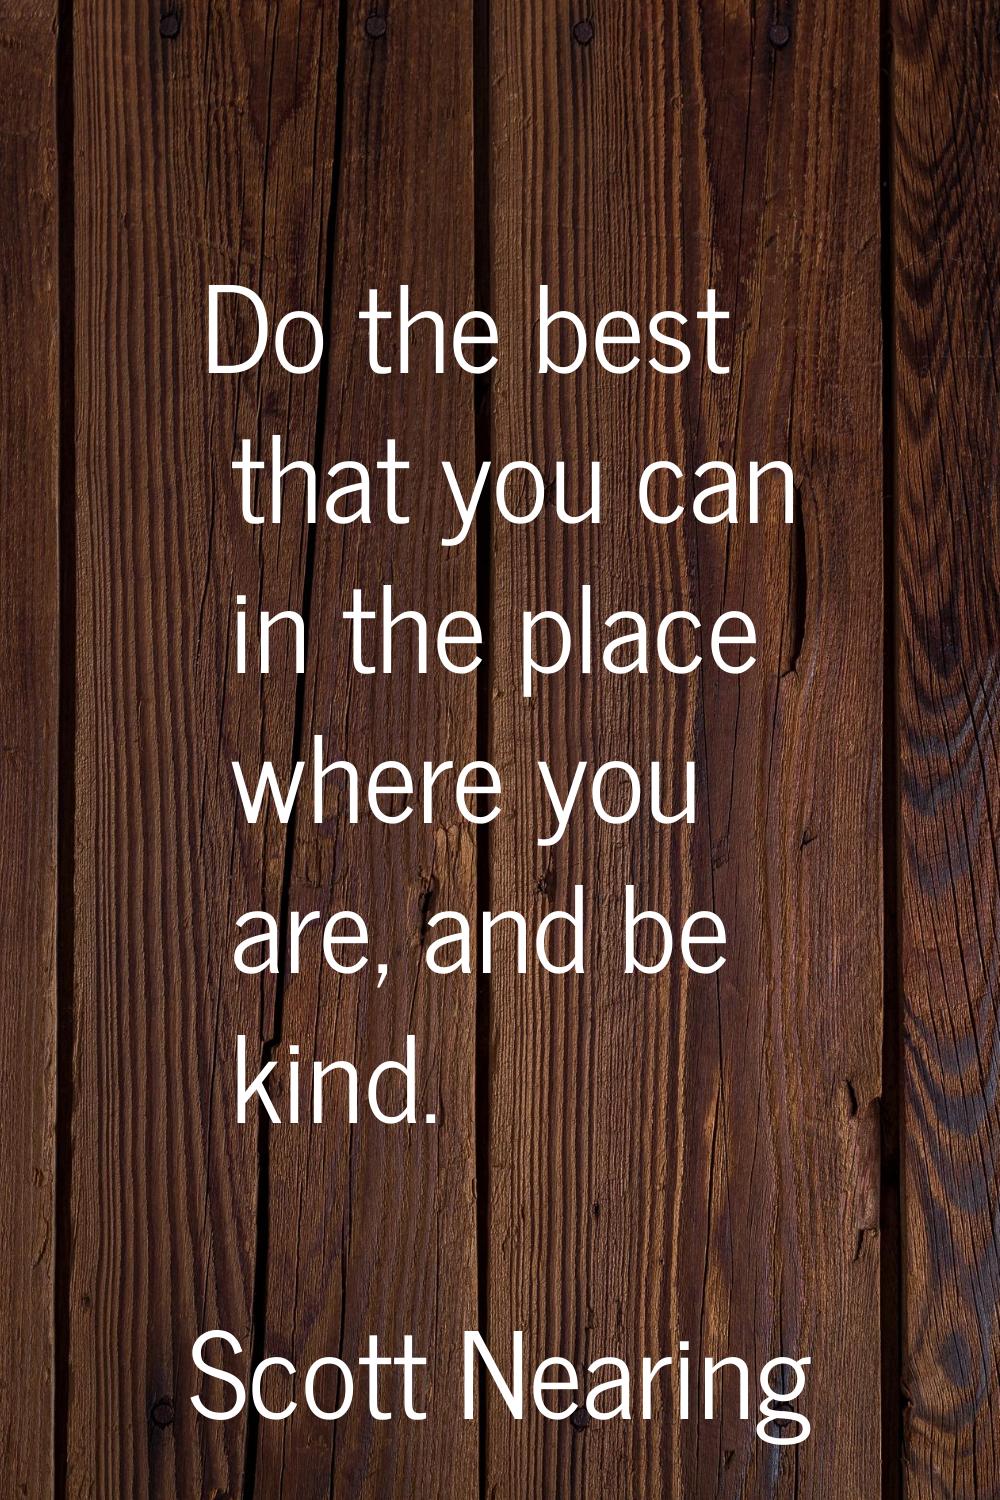 Do the best that you can in the place where you are, and be kind.